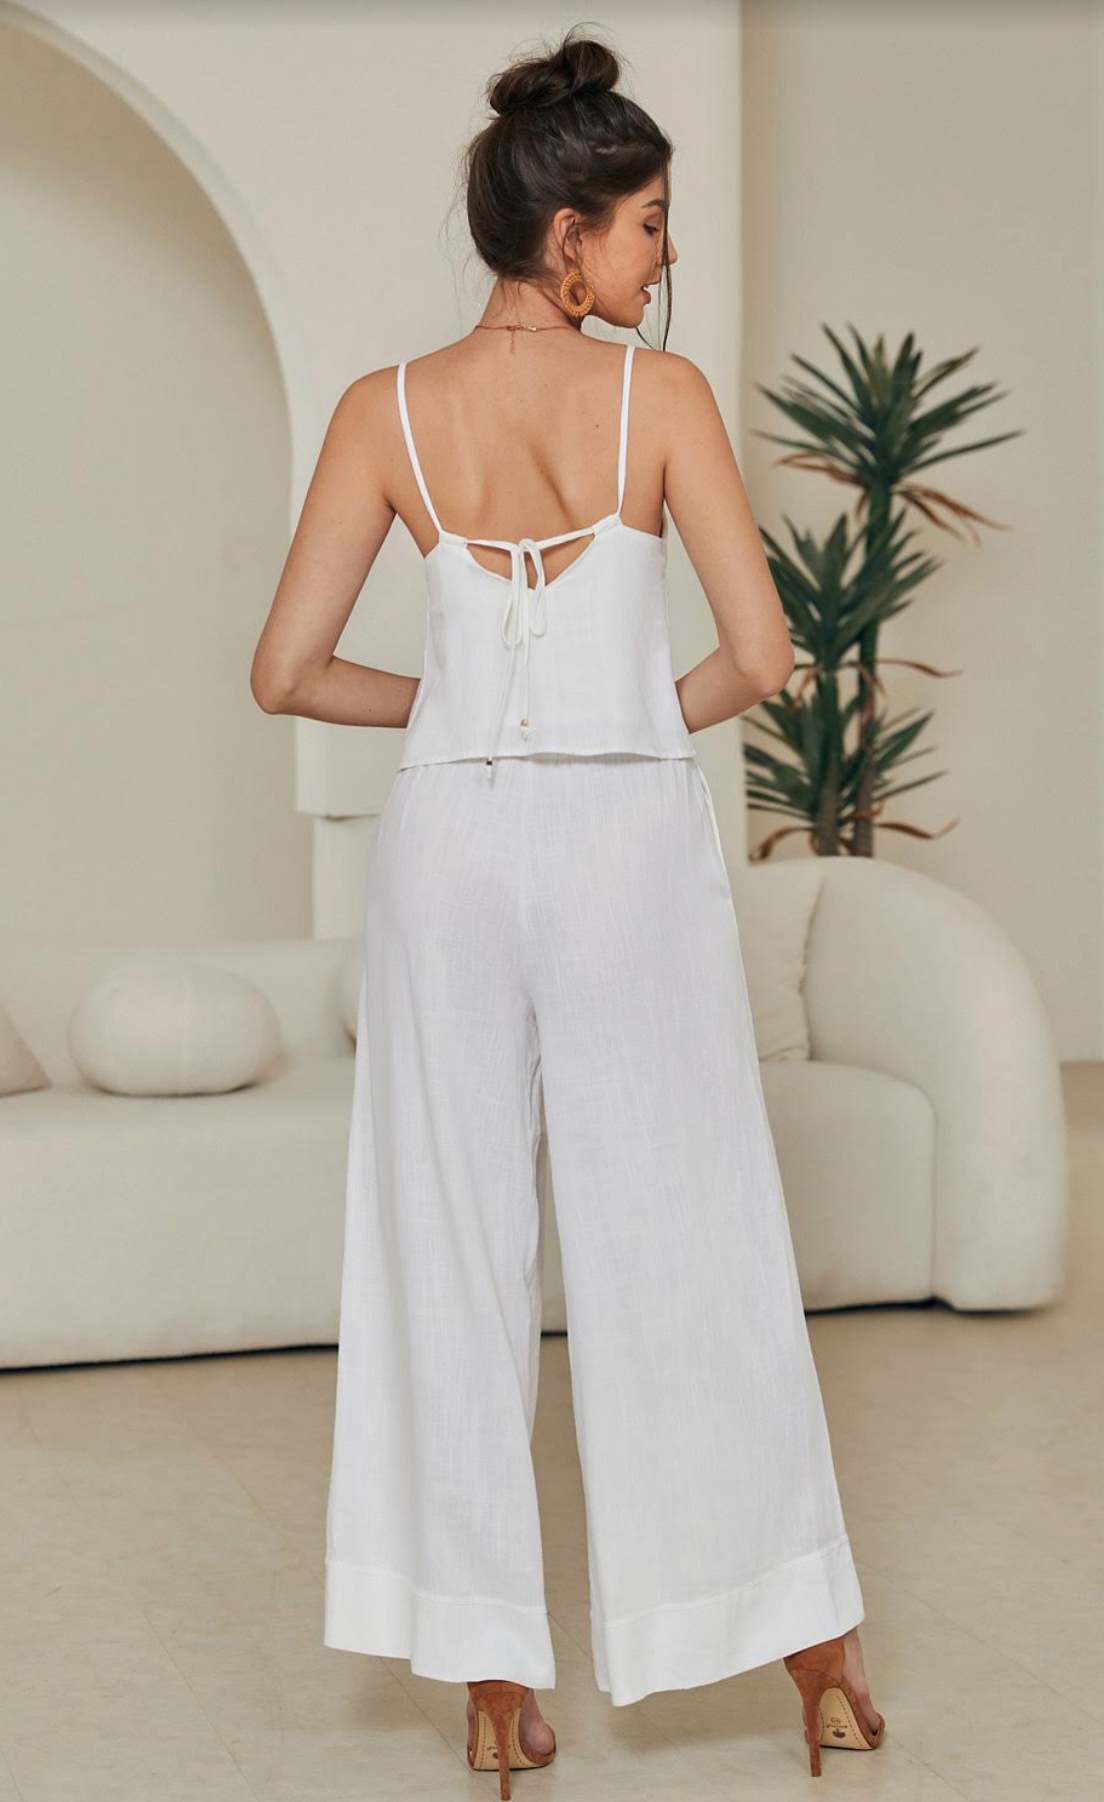 Our Tara Linen Pants, crafted with luxurious linen fabric, make a statement of refinement. Featuring a drawstring waist and elastic waistband, these pants ensure a perfect and comfortable fit, while their pockets add a level of sophistication and convenience. Elevate your wardrobe with the timeless elegance of these divine pants.